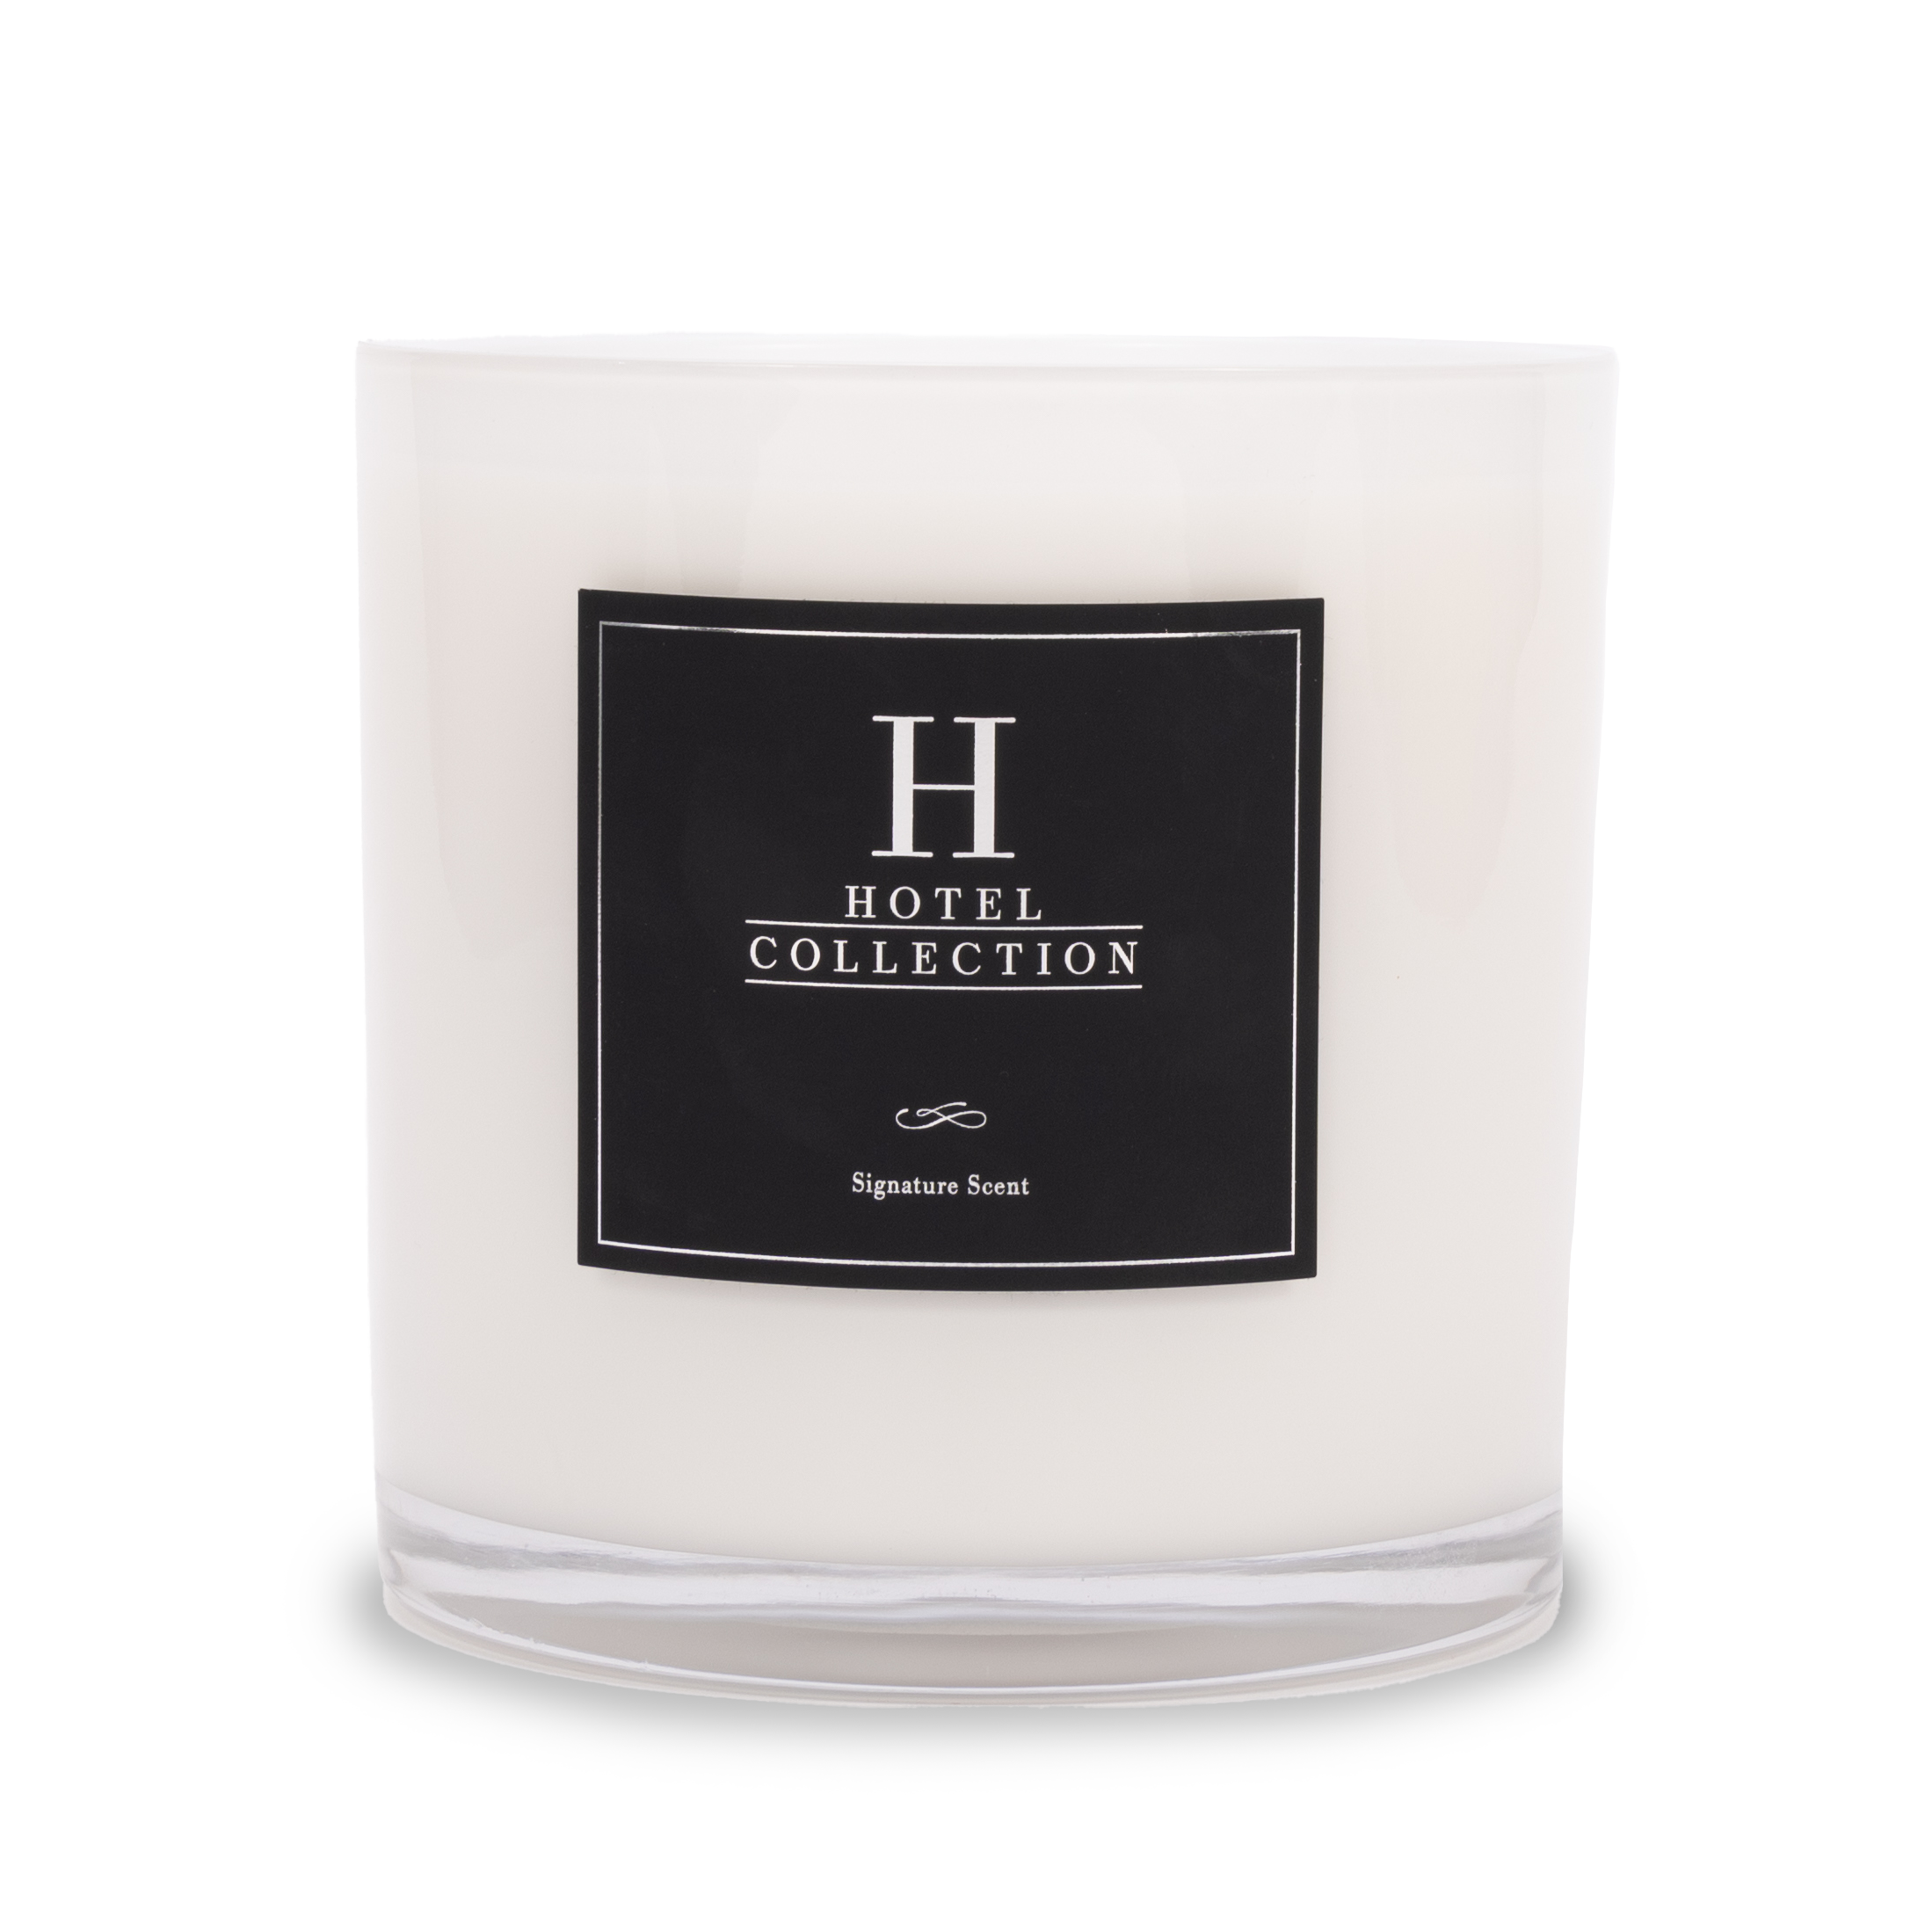 Deluxe Desert Rose Candle